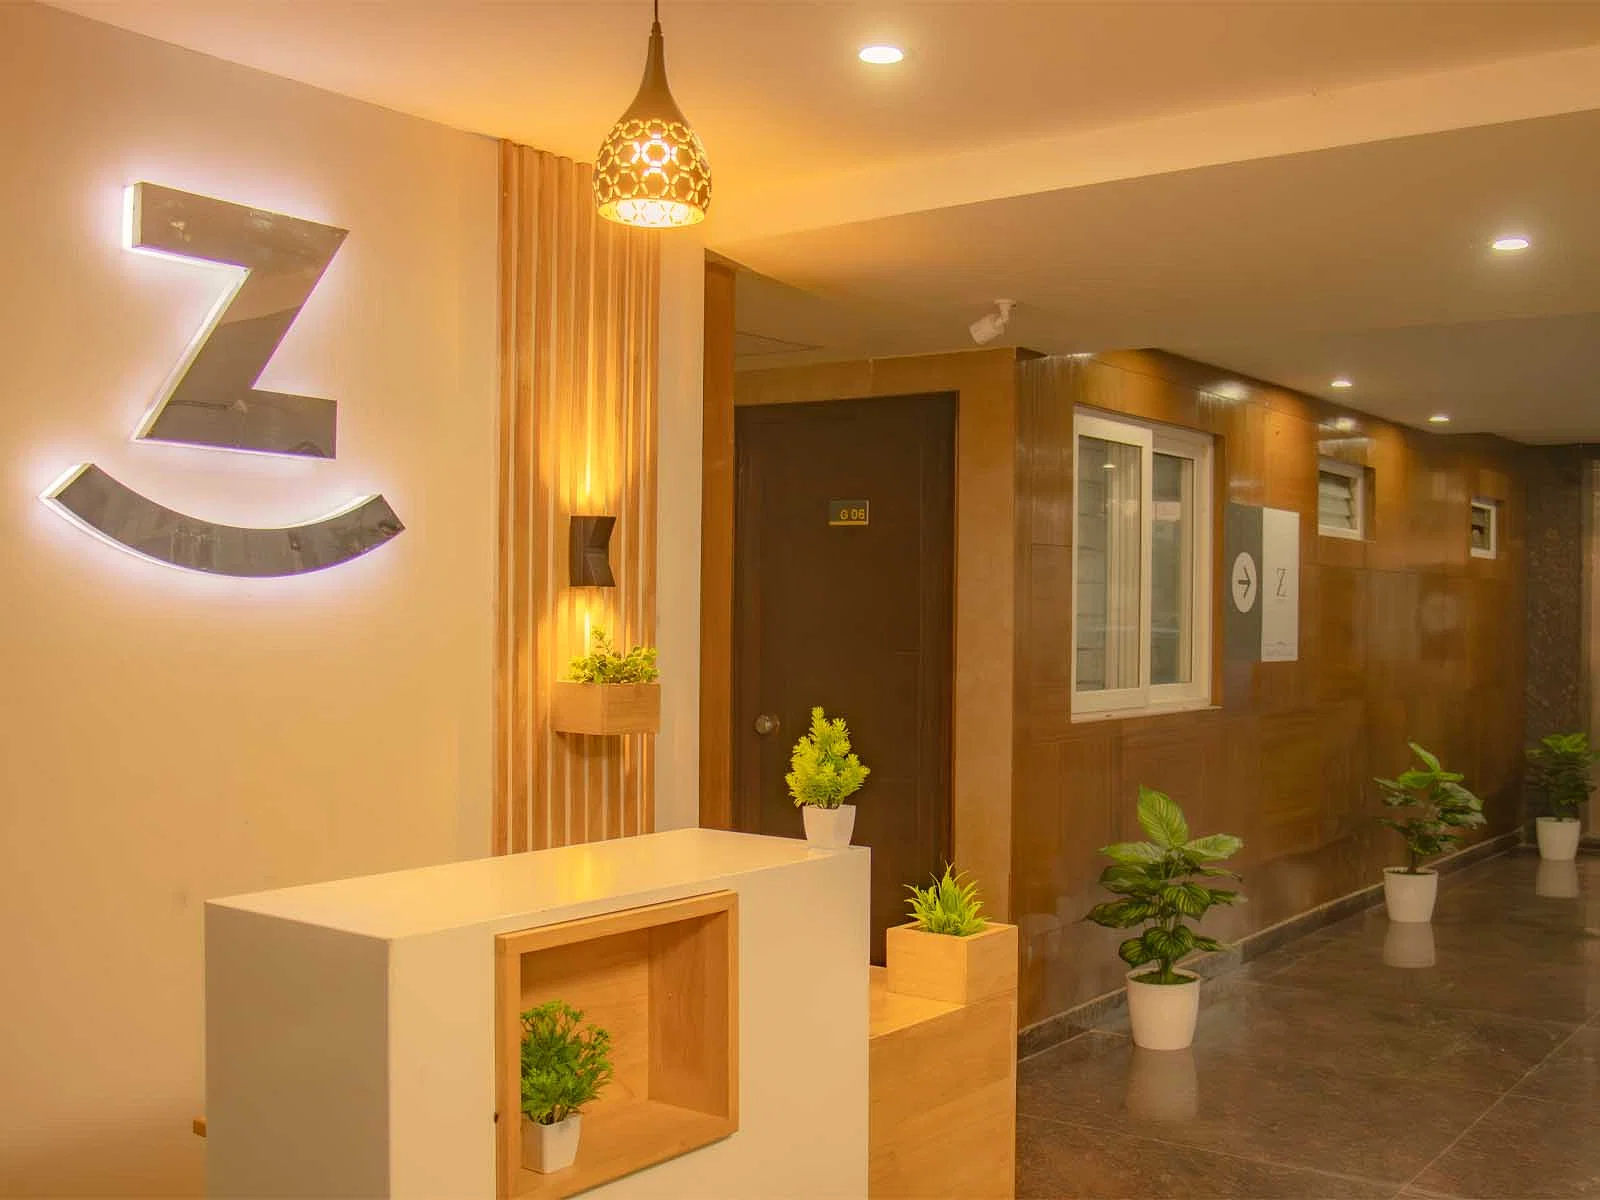 budget-friendly PGs and hostels for unisex with single rooms with daily hopusekeeping-Zolo Marquis